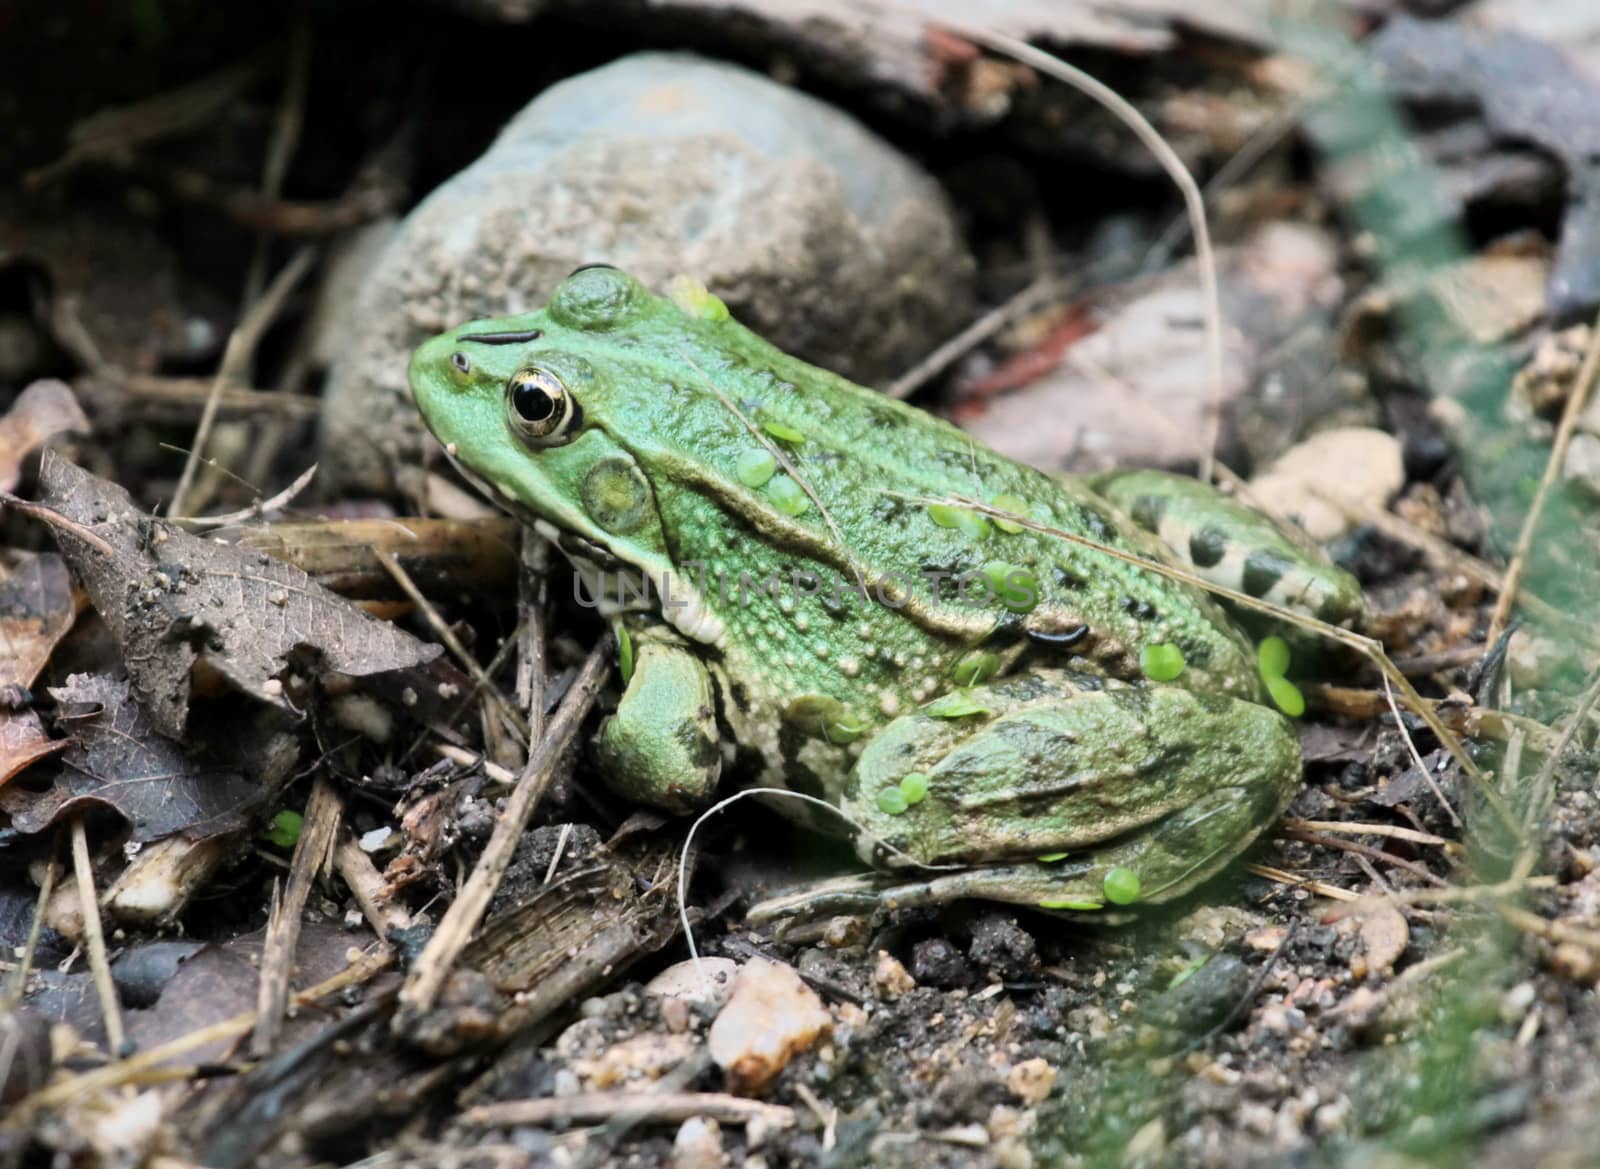 Green frog standing quietly on the ground among vegetation